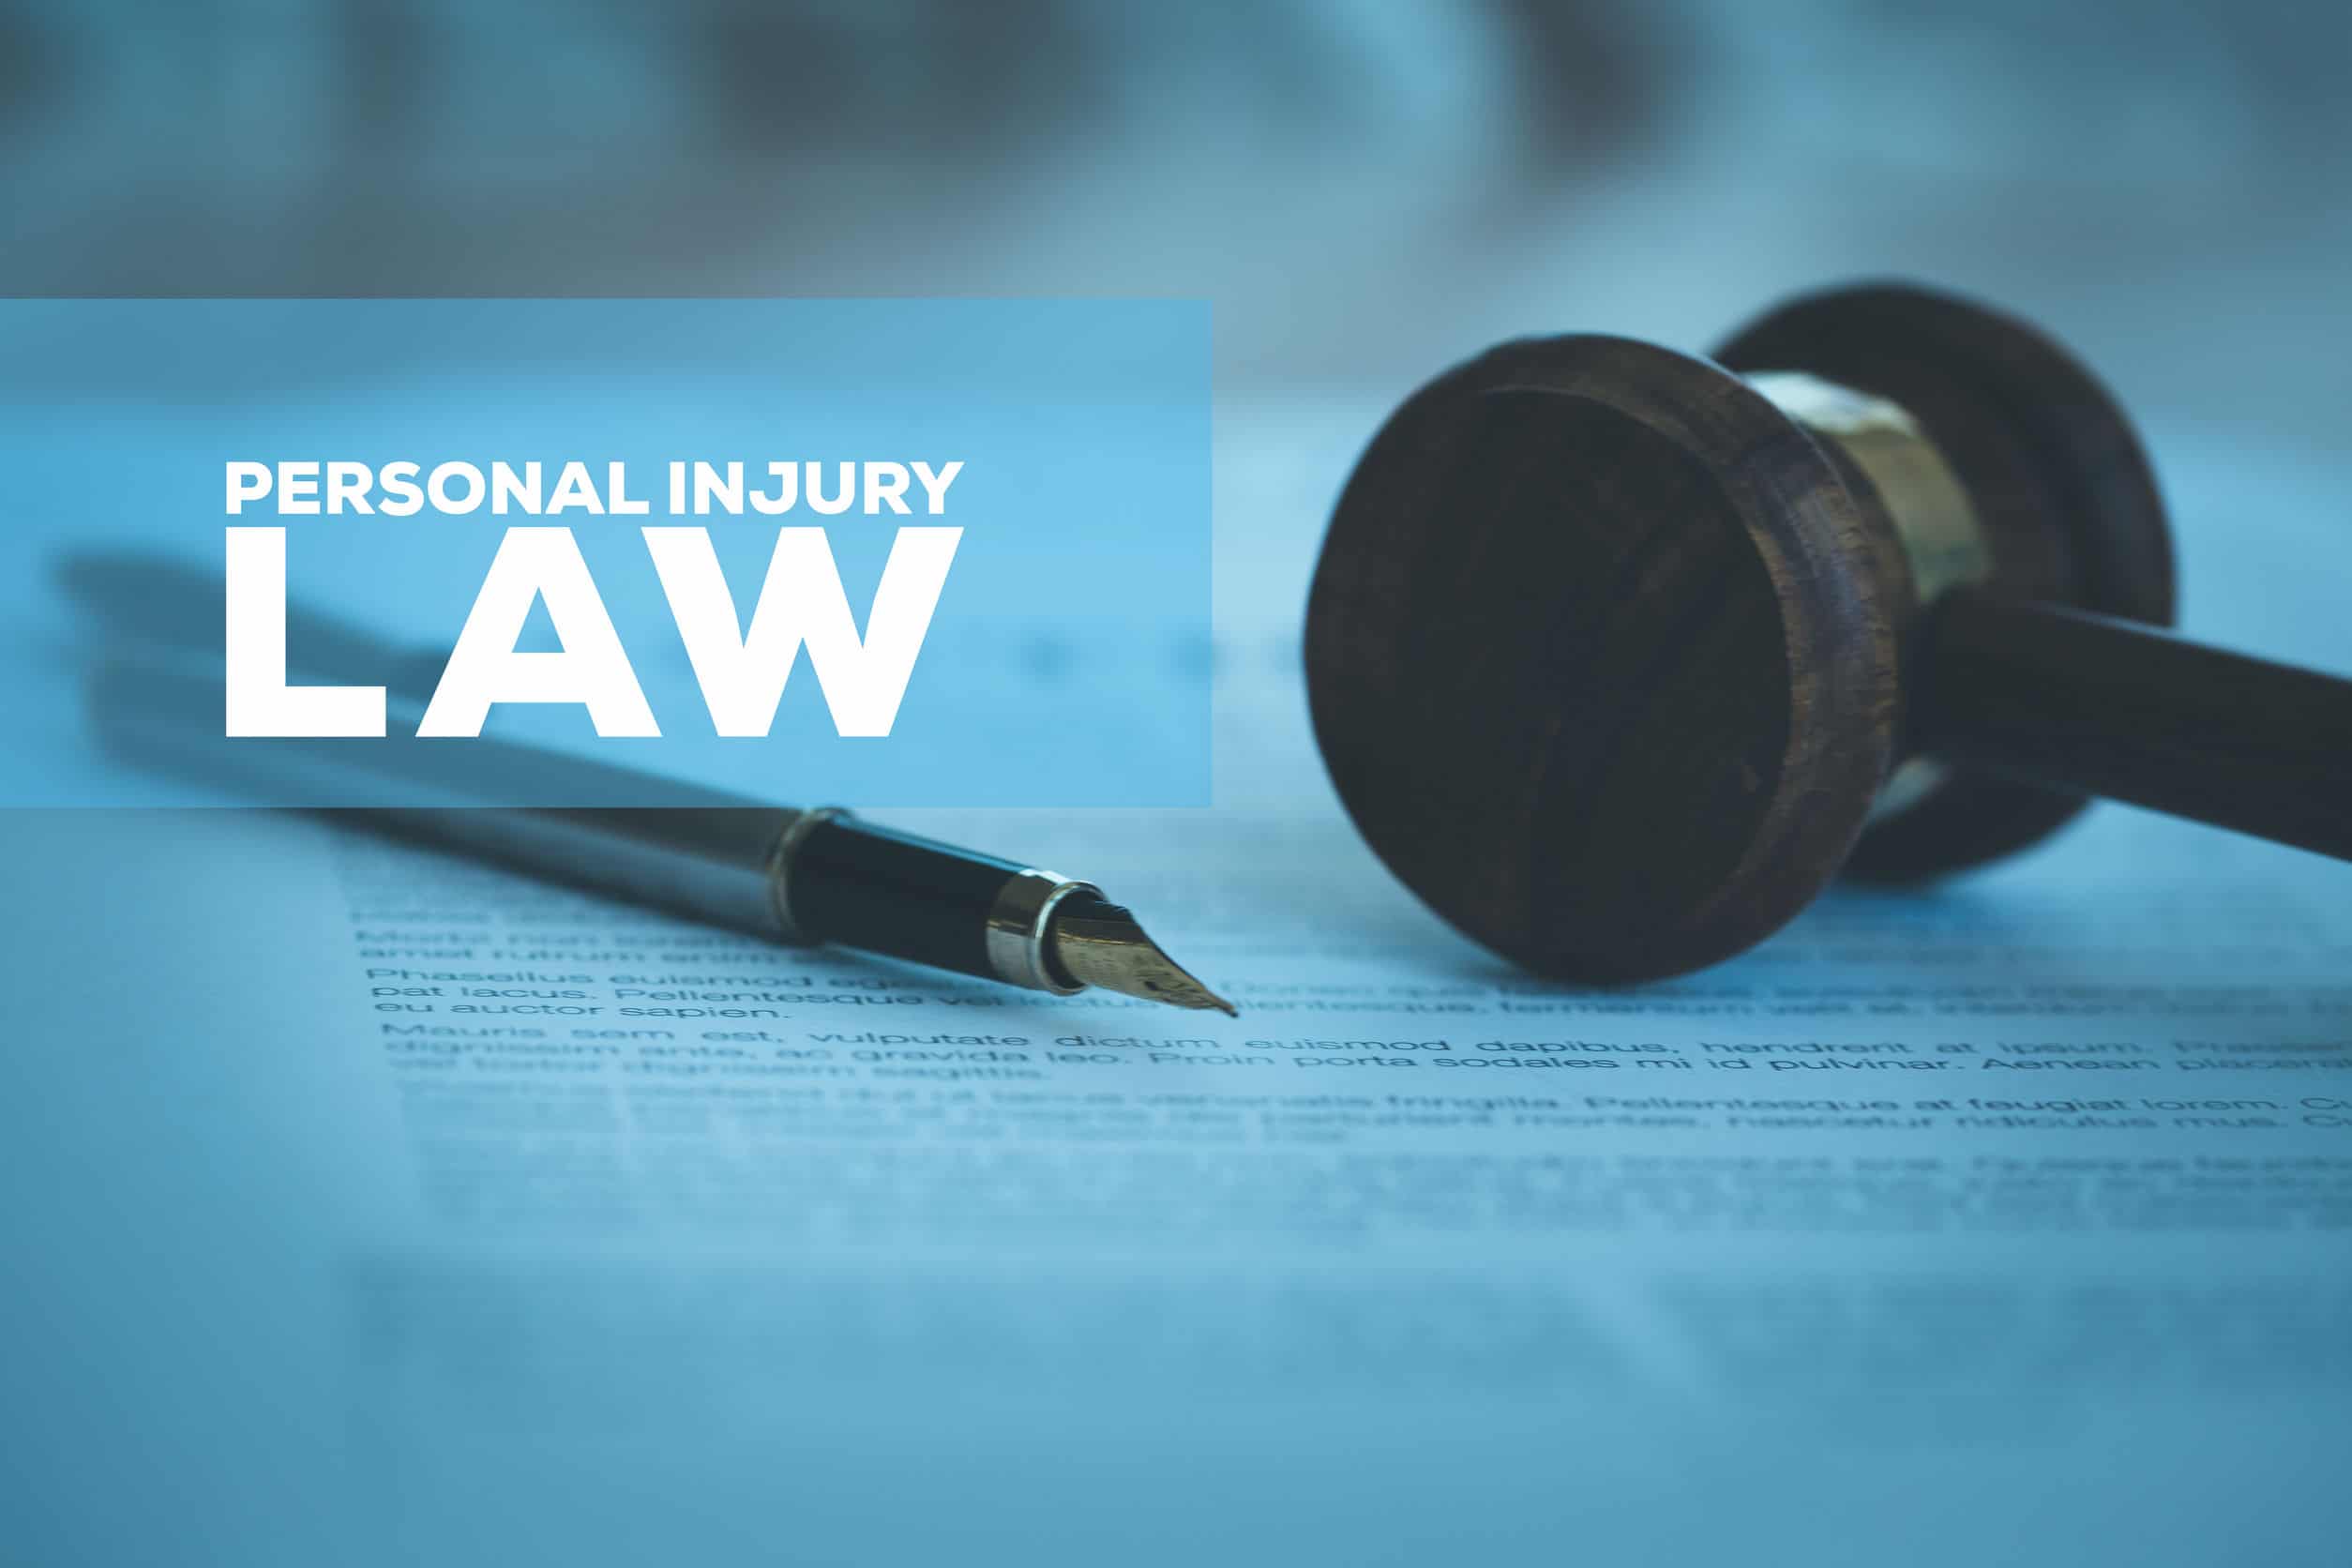 Personal injury accident claim